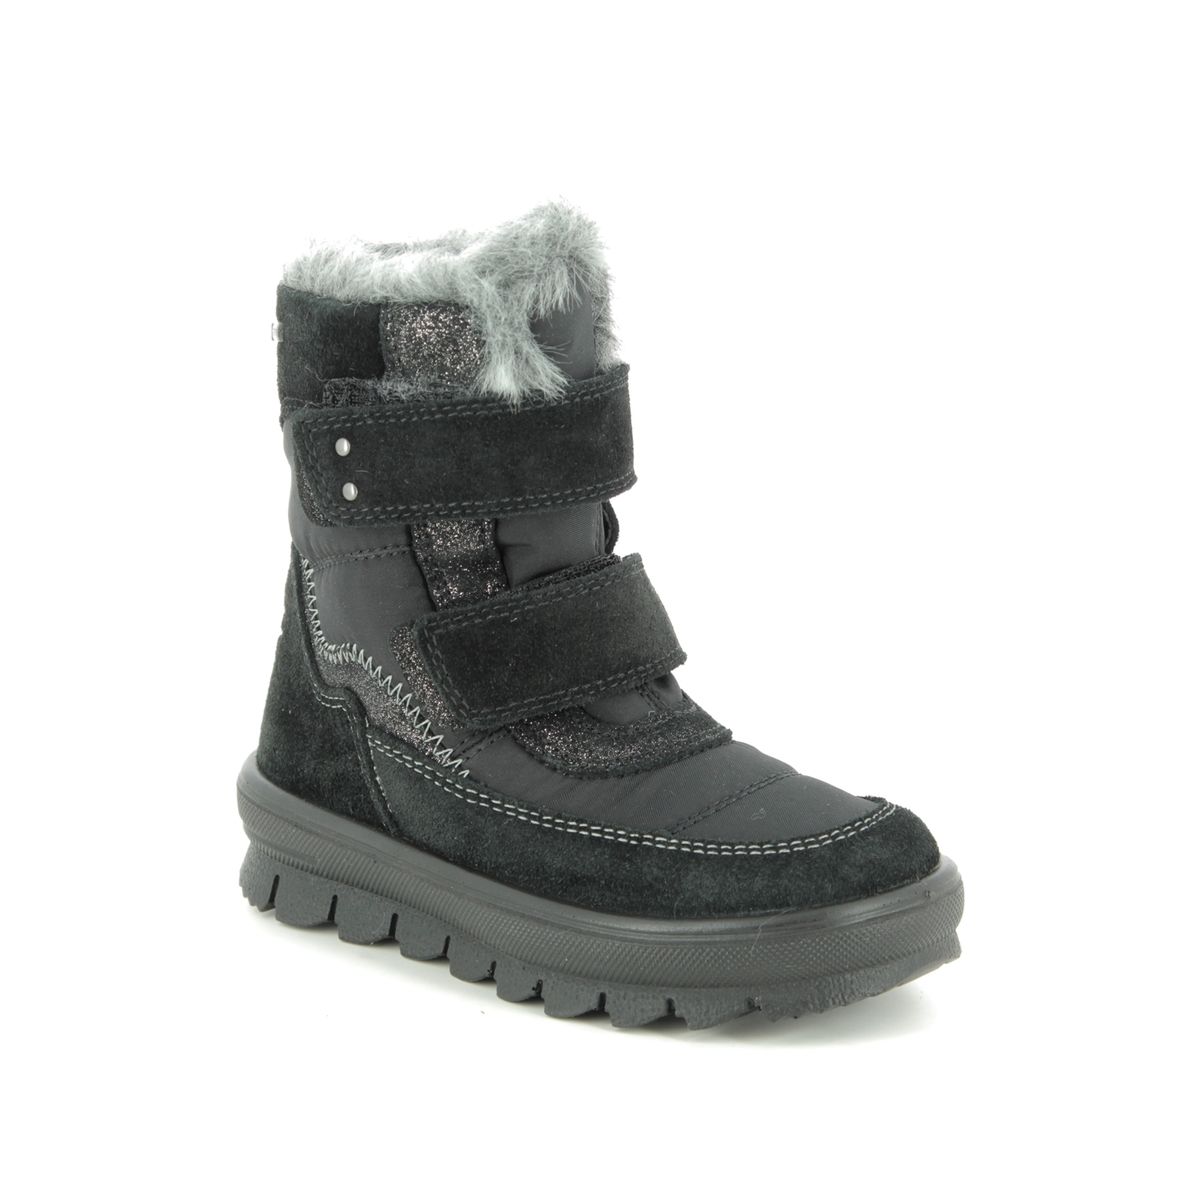 Superfit Flavia Vel Gtx Black Suede Kids Toddler Girls Boots 09214-00 In Size 27 In Plain Black Suede For kids